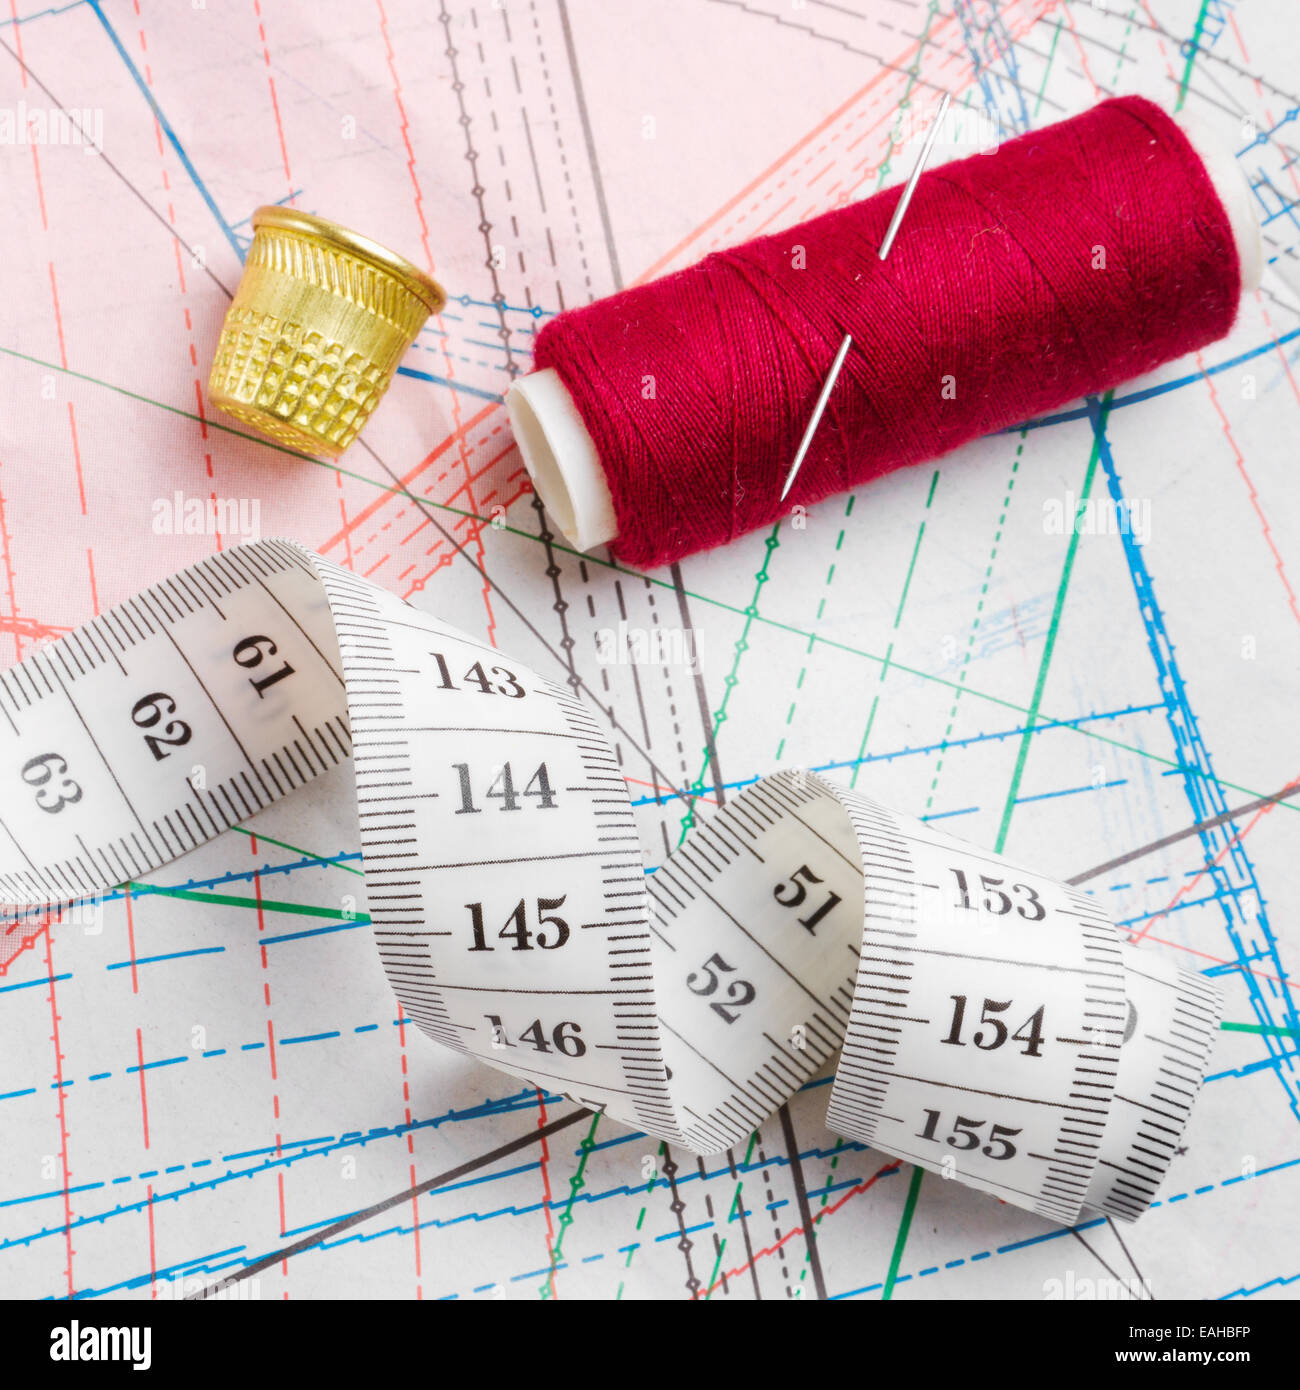 https://c8.alamy.com/comp/EAHBFP/measuring-tape-thimble-and-bobbin-of-thread-lie-of-paper-patterns-EAHBFP.jpg